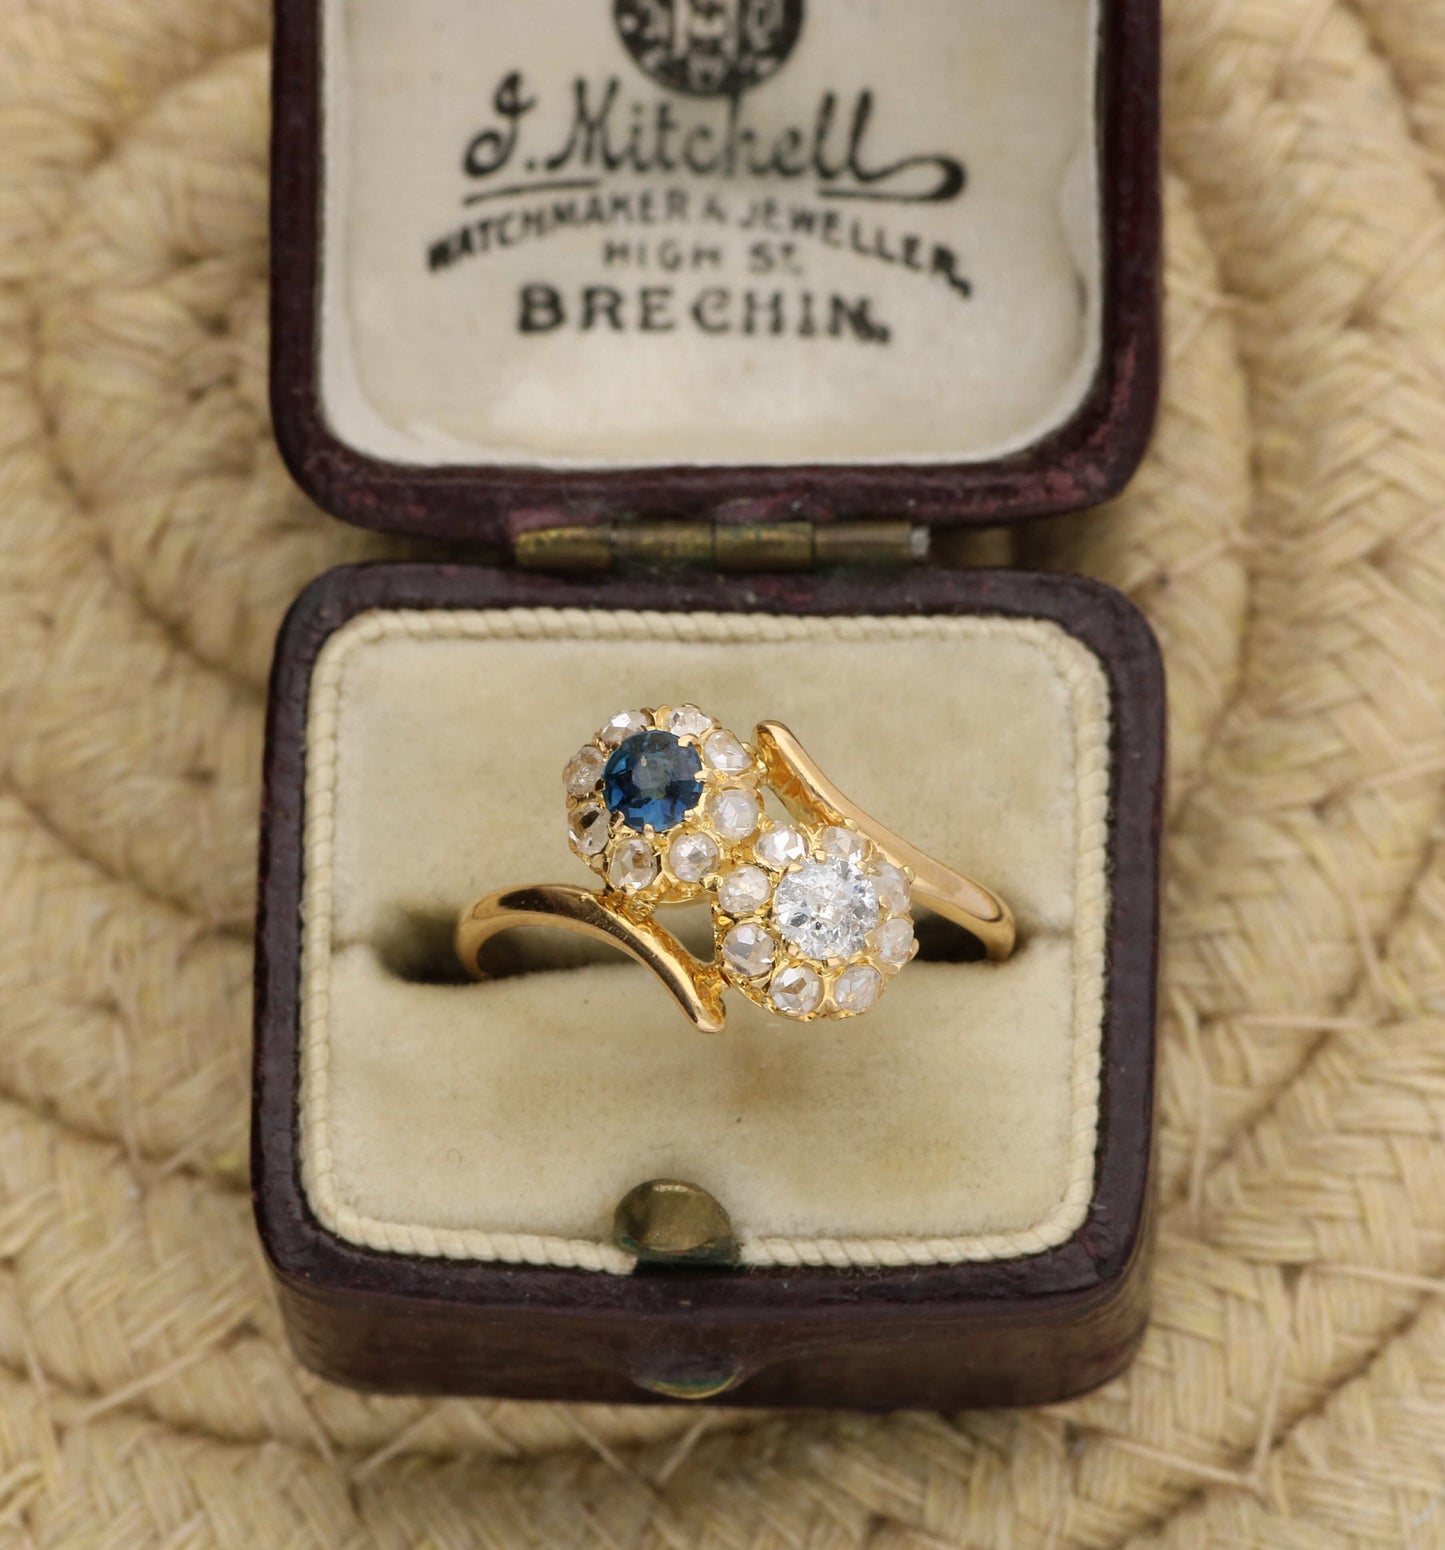 Antique 15ct diamond and sapphire cluster ring